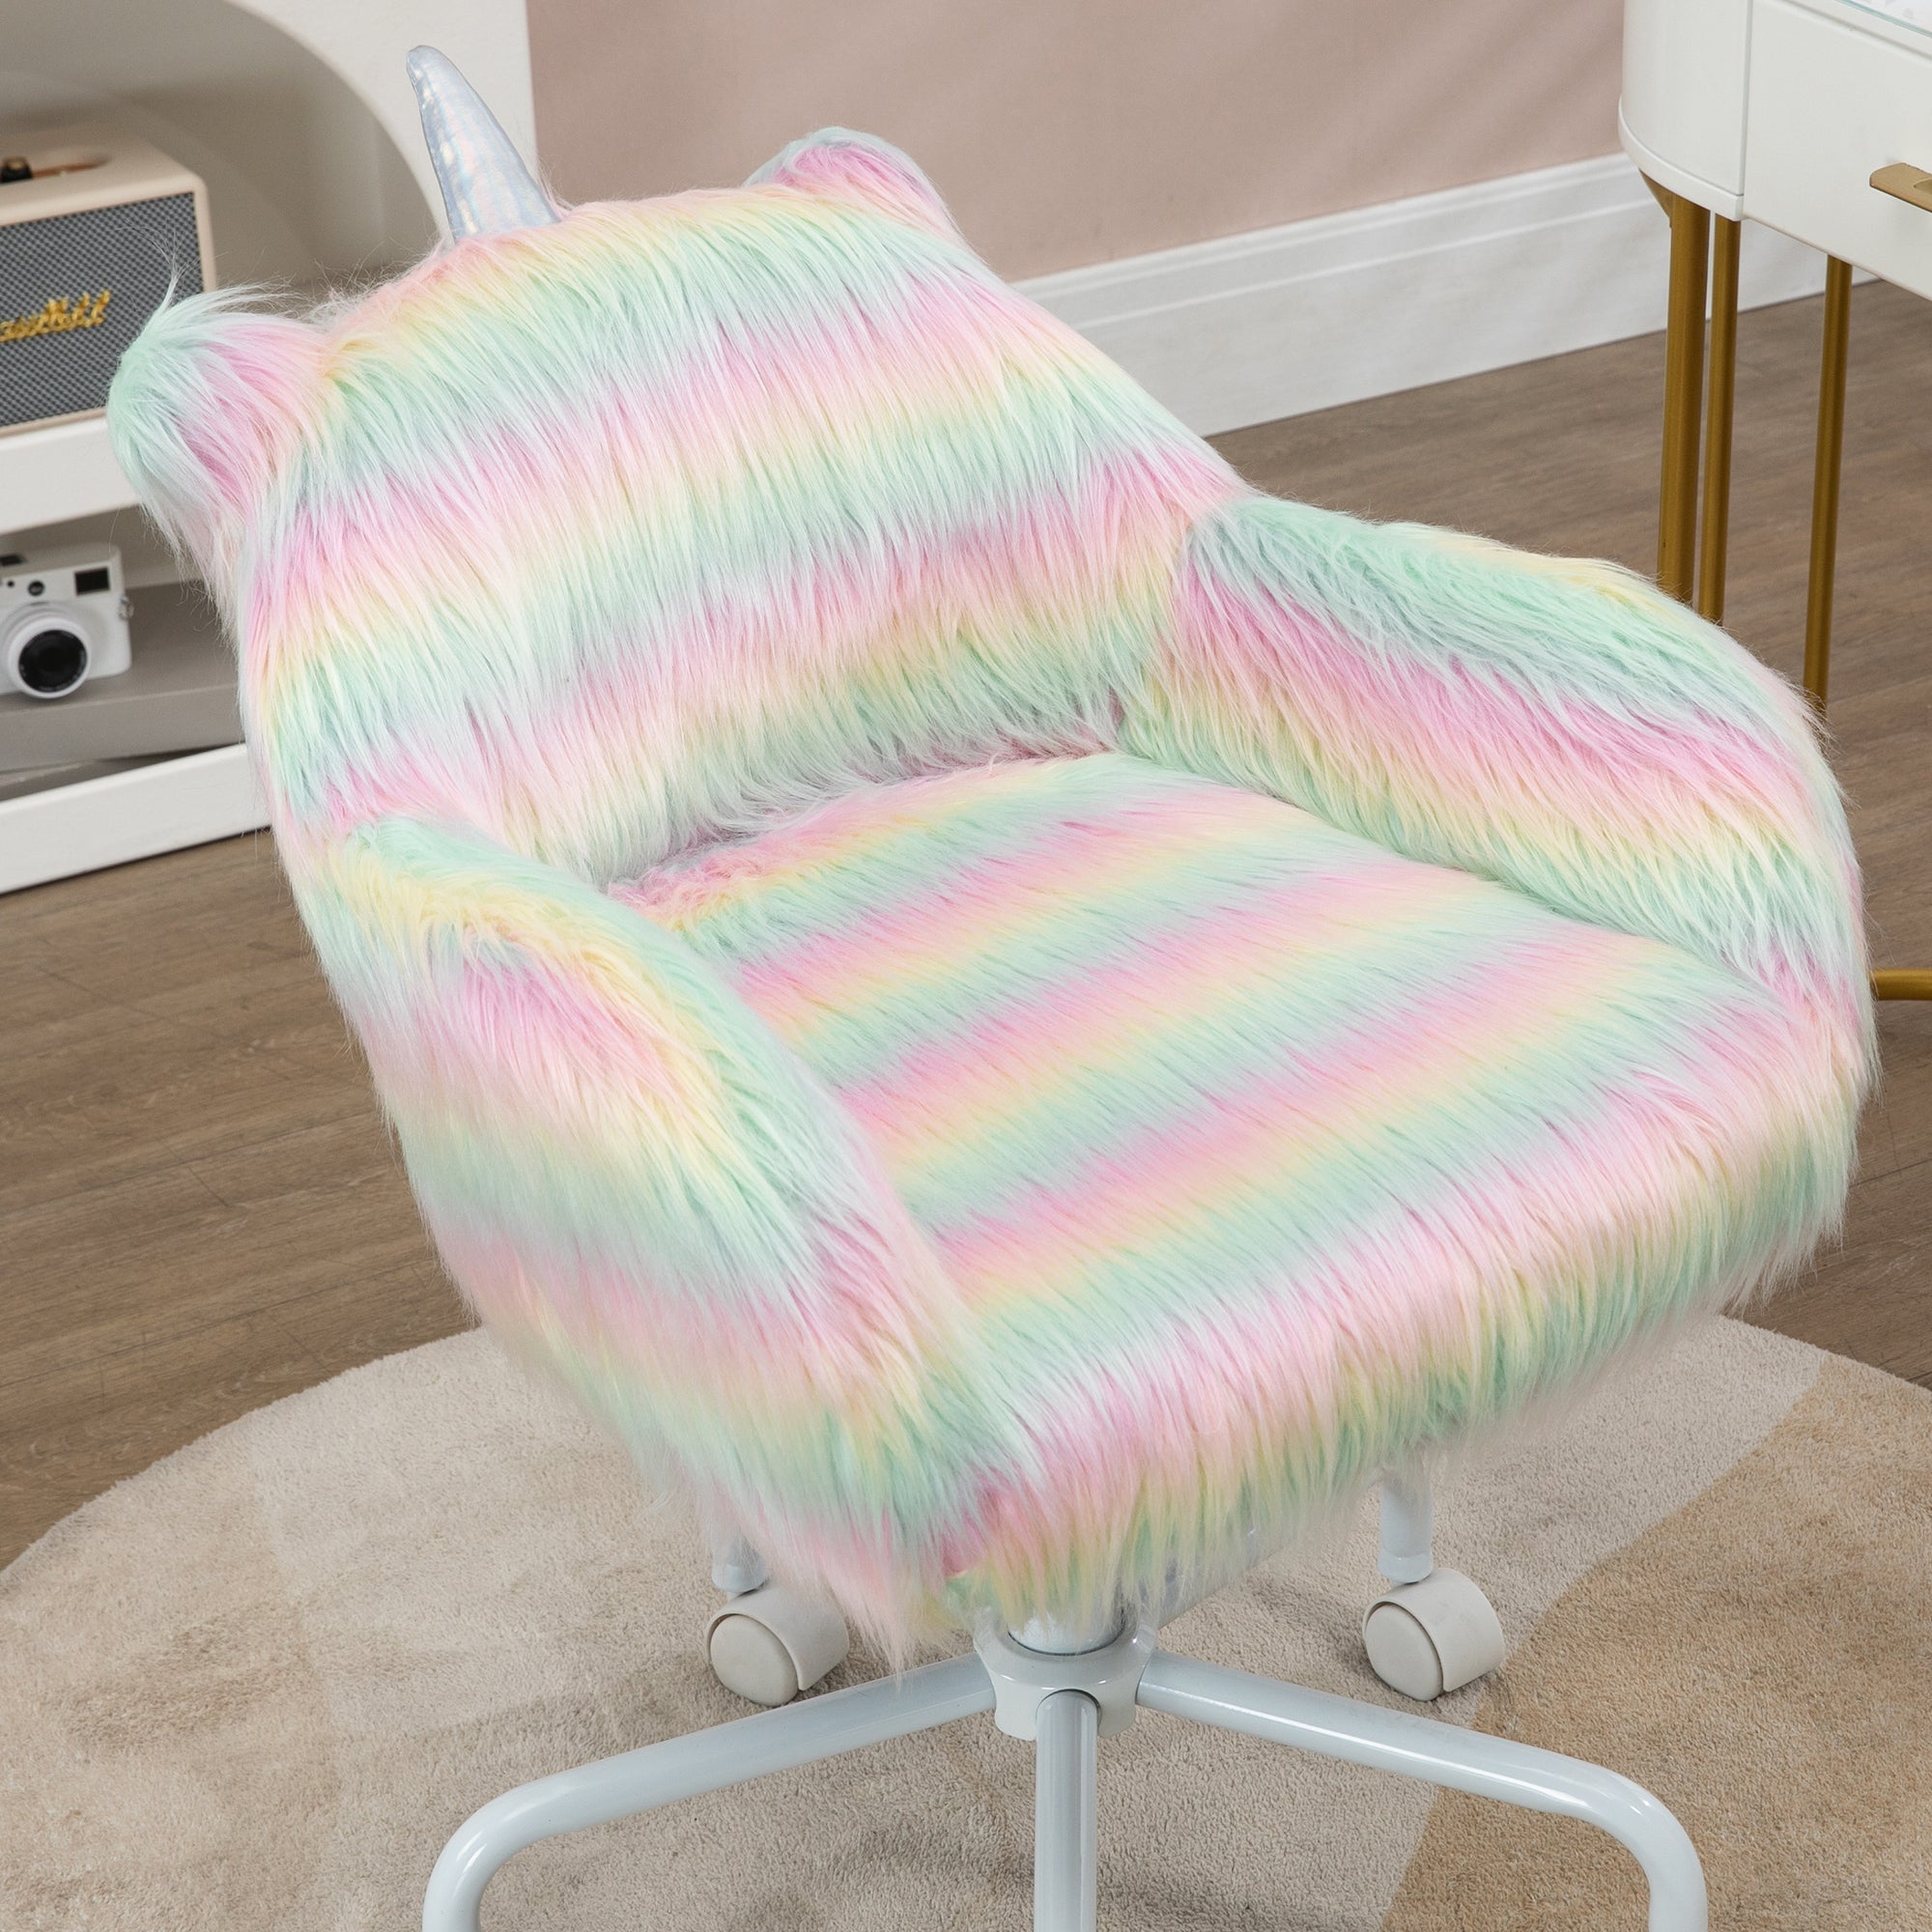 Bellemave® Fluffy Unicorn Office Chair with Mid-Back and Armrest Support, 5 Star Swivel Wheel White Base Bellemave®